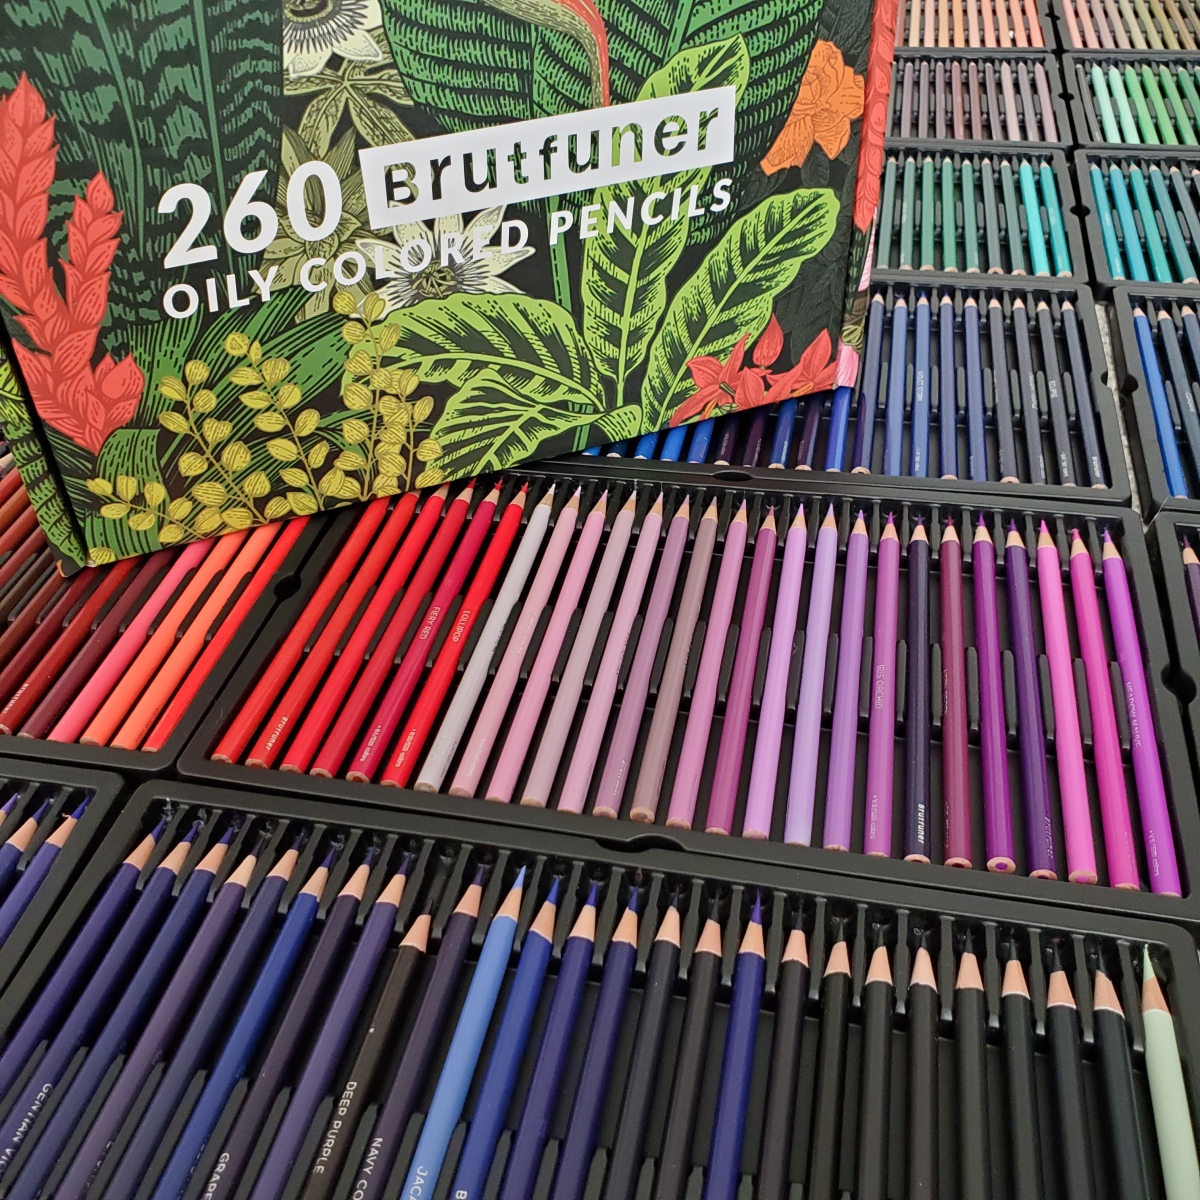 Brutfuner 520 Oily Pencils – Do You Really Need That Many Pencils